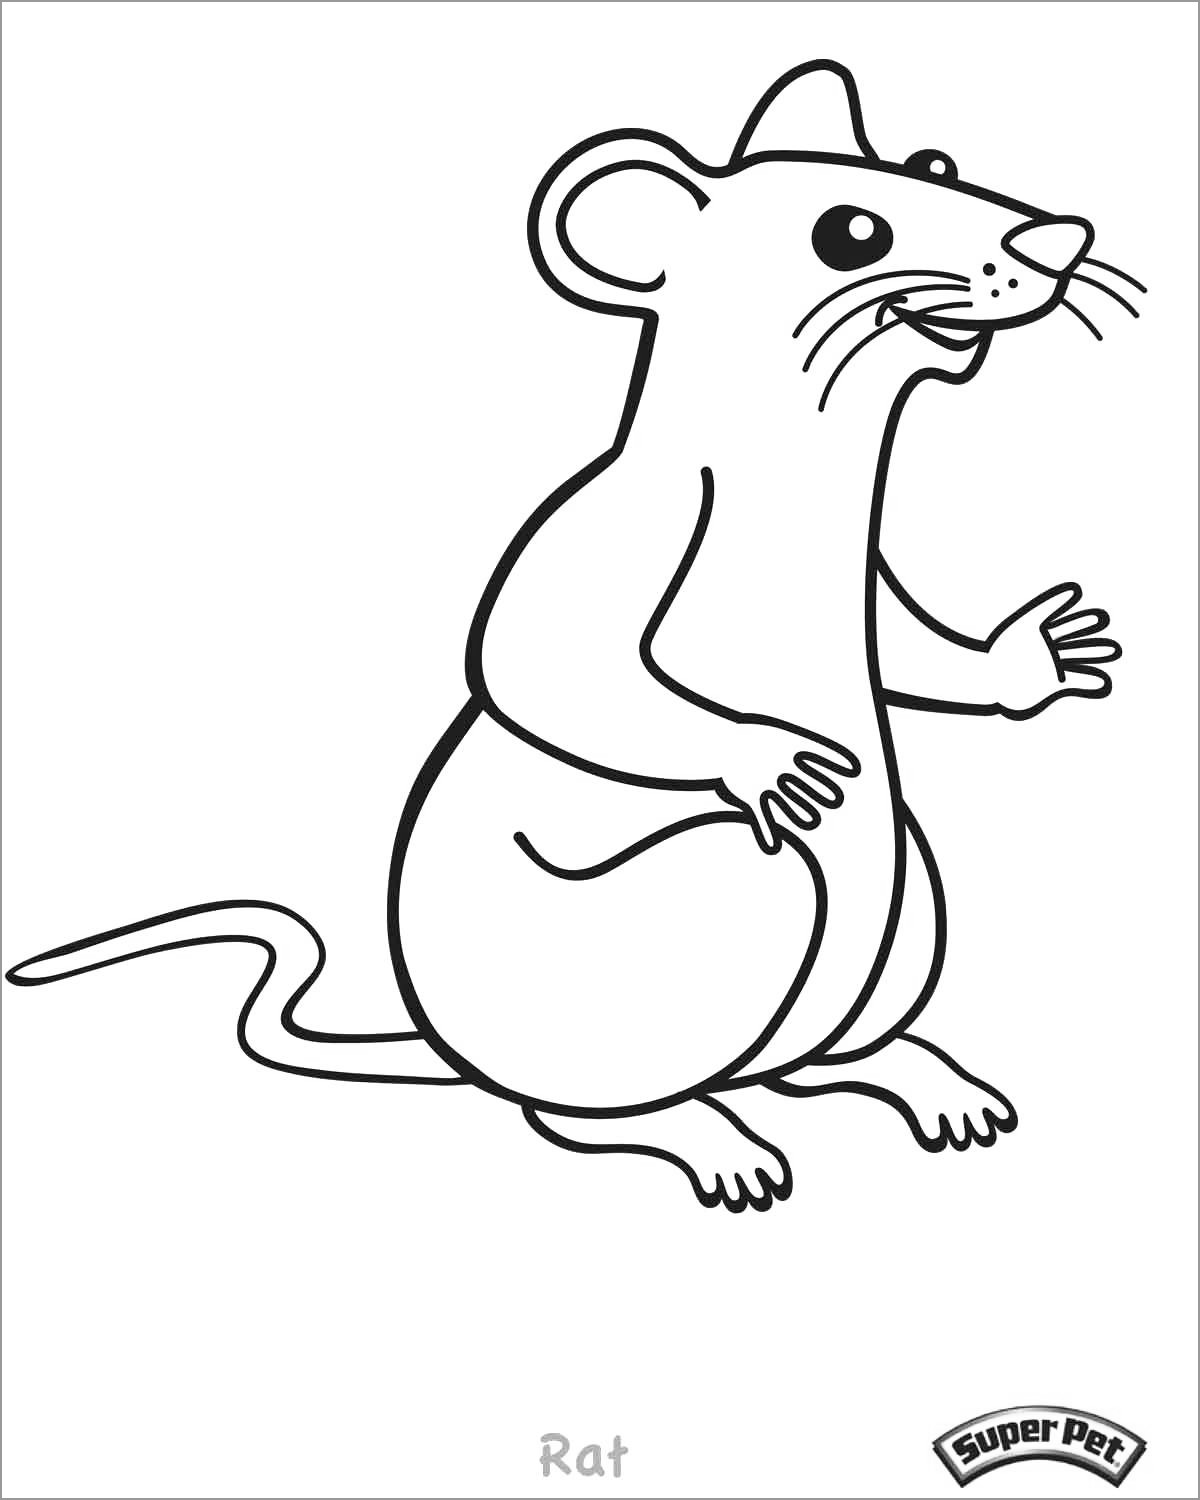 Funny Rat Coloring Page   ColoringBay